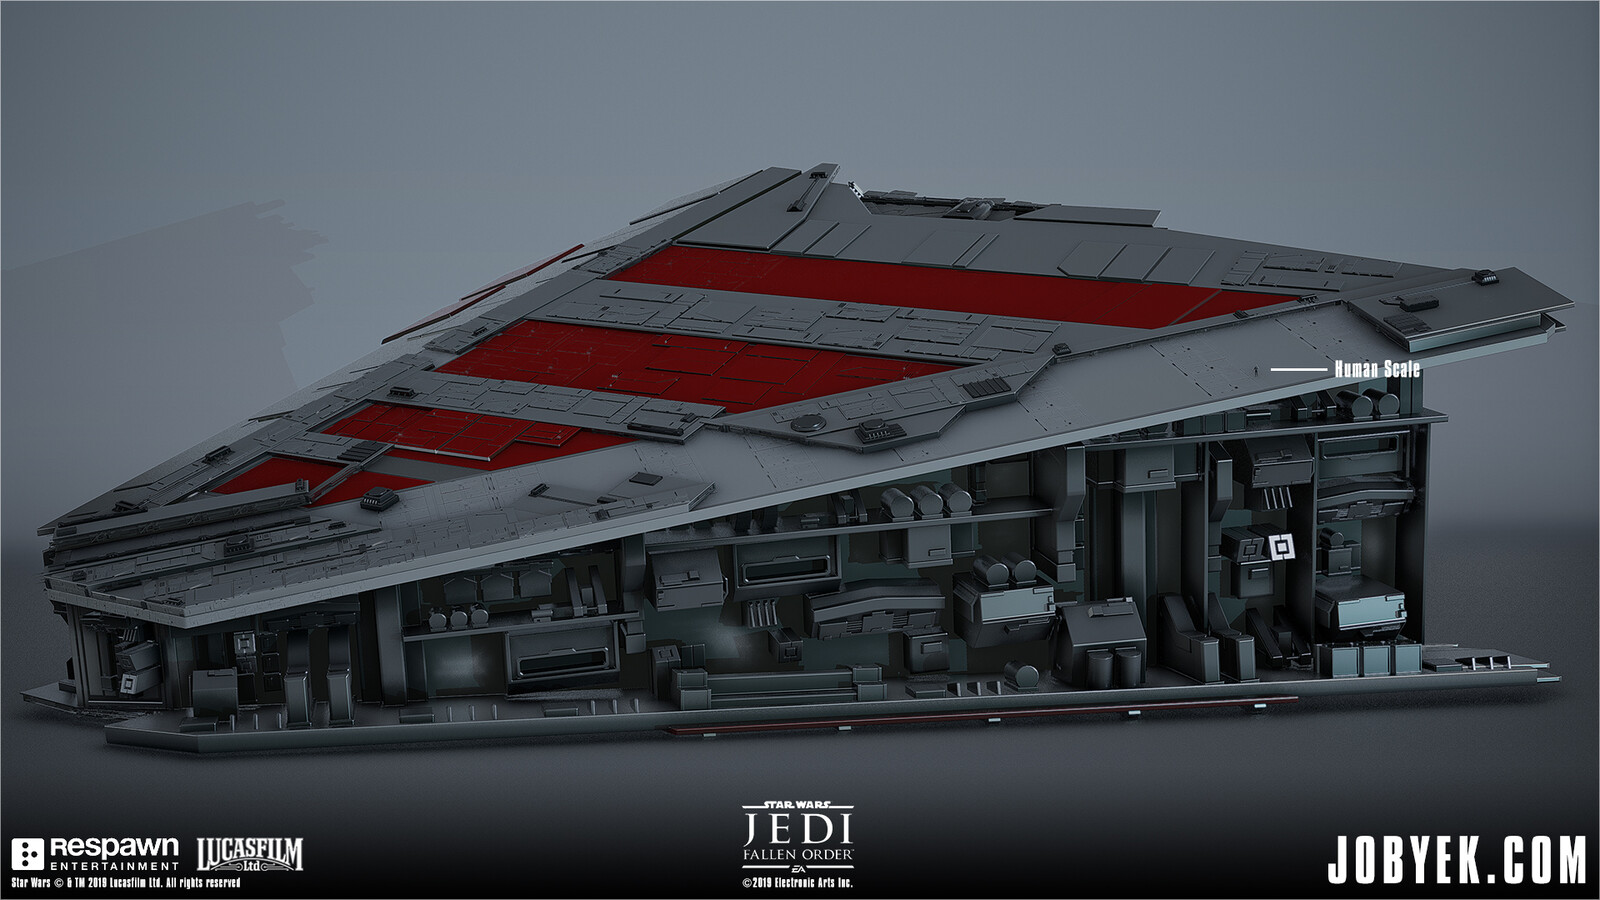 Modeling work on Venator Wing that is used and navigated on throughout the level. This was supplemented by smaller modular panels added in-engine (but shown here merged). Initial base model from DICE.